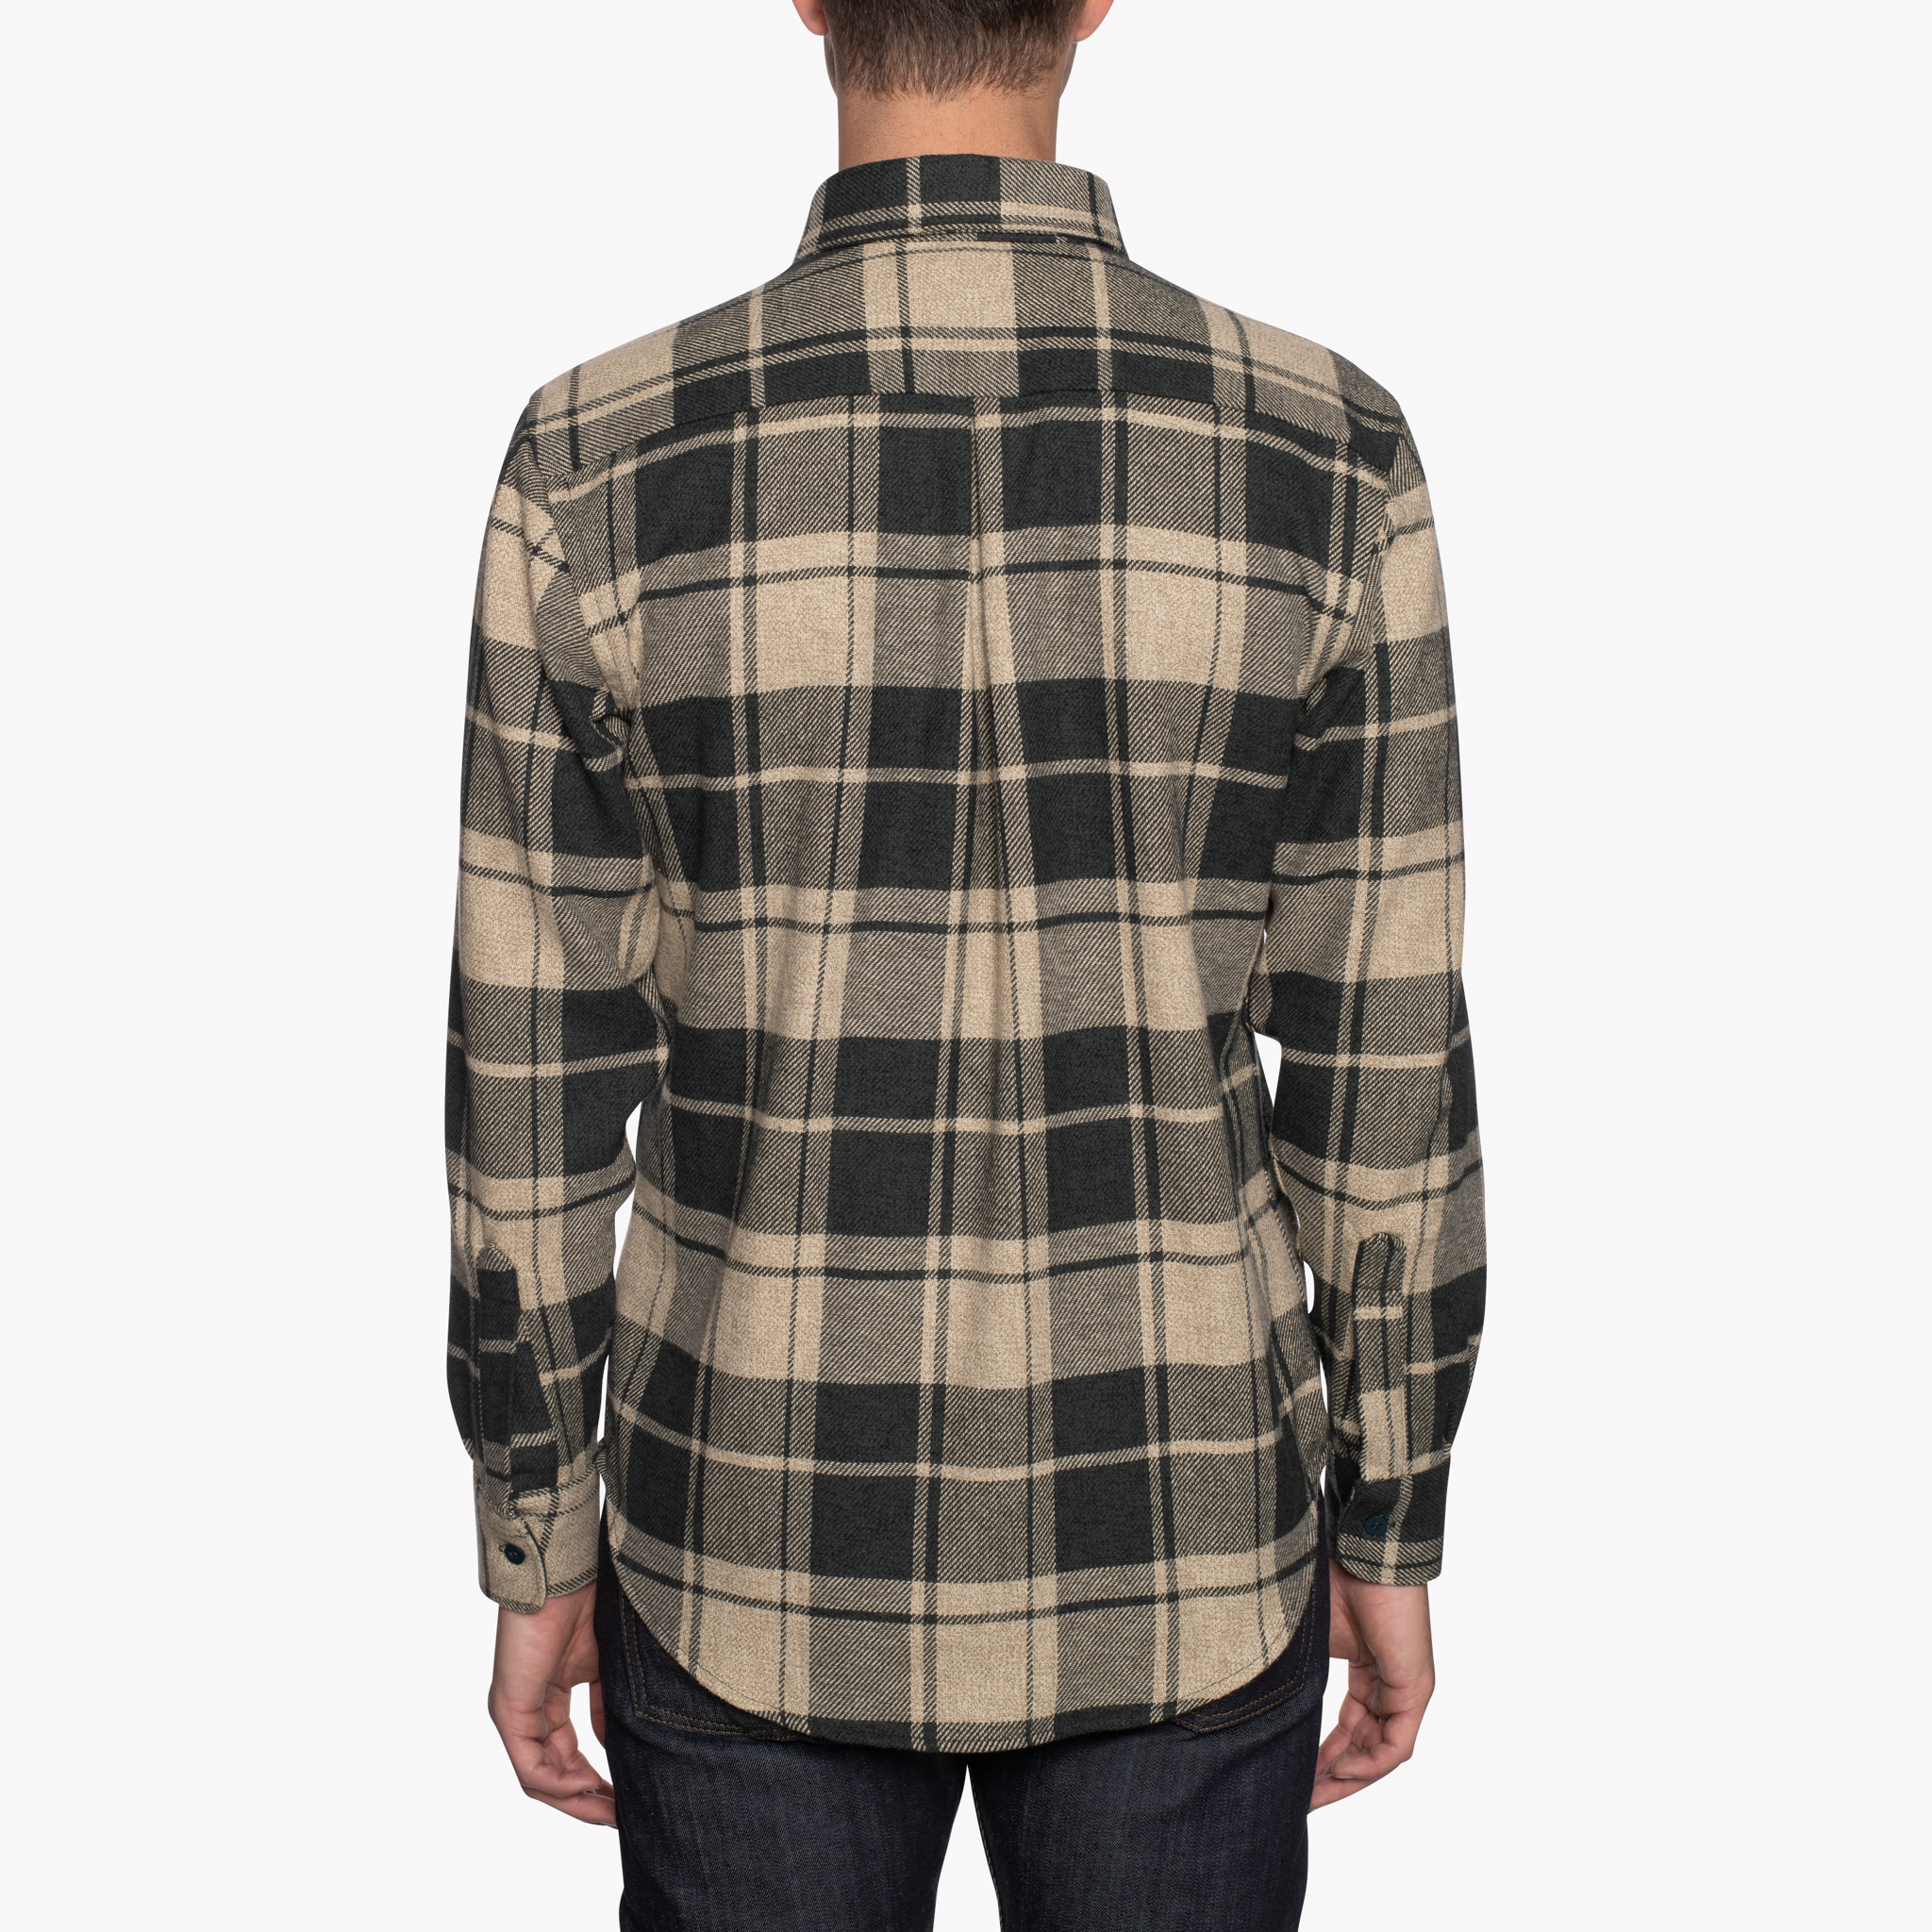  Easy Shirt - Heavy Vintage Flannel - Forest/Grey - back 